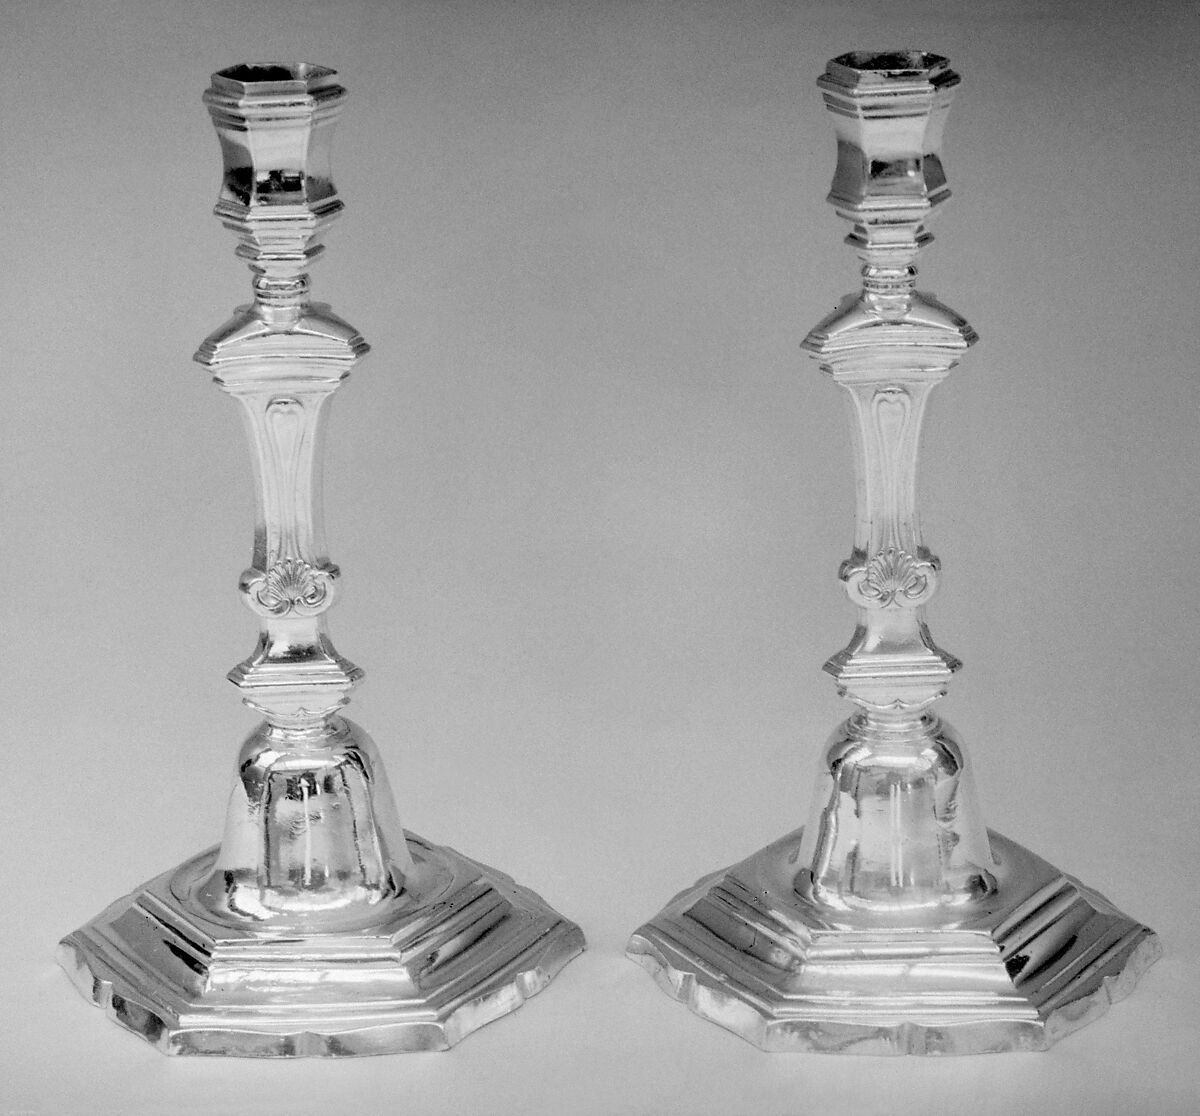 Pair of candlesticks, François II Lacassaigne (born 1706, master 1733, recorded 1773), Silver, French, Montauban (Toulouse Mint) 